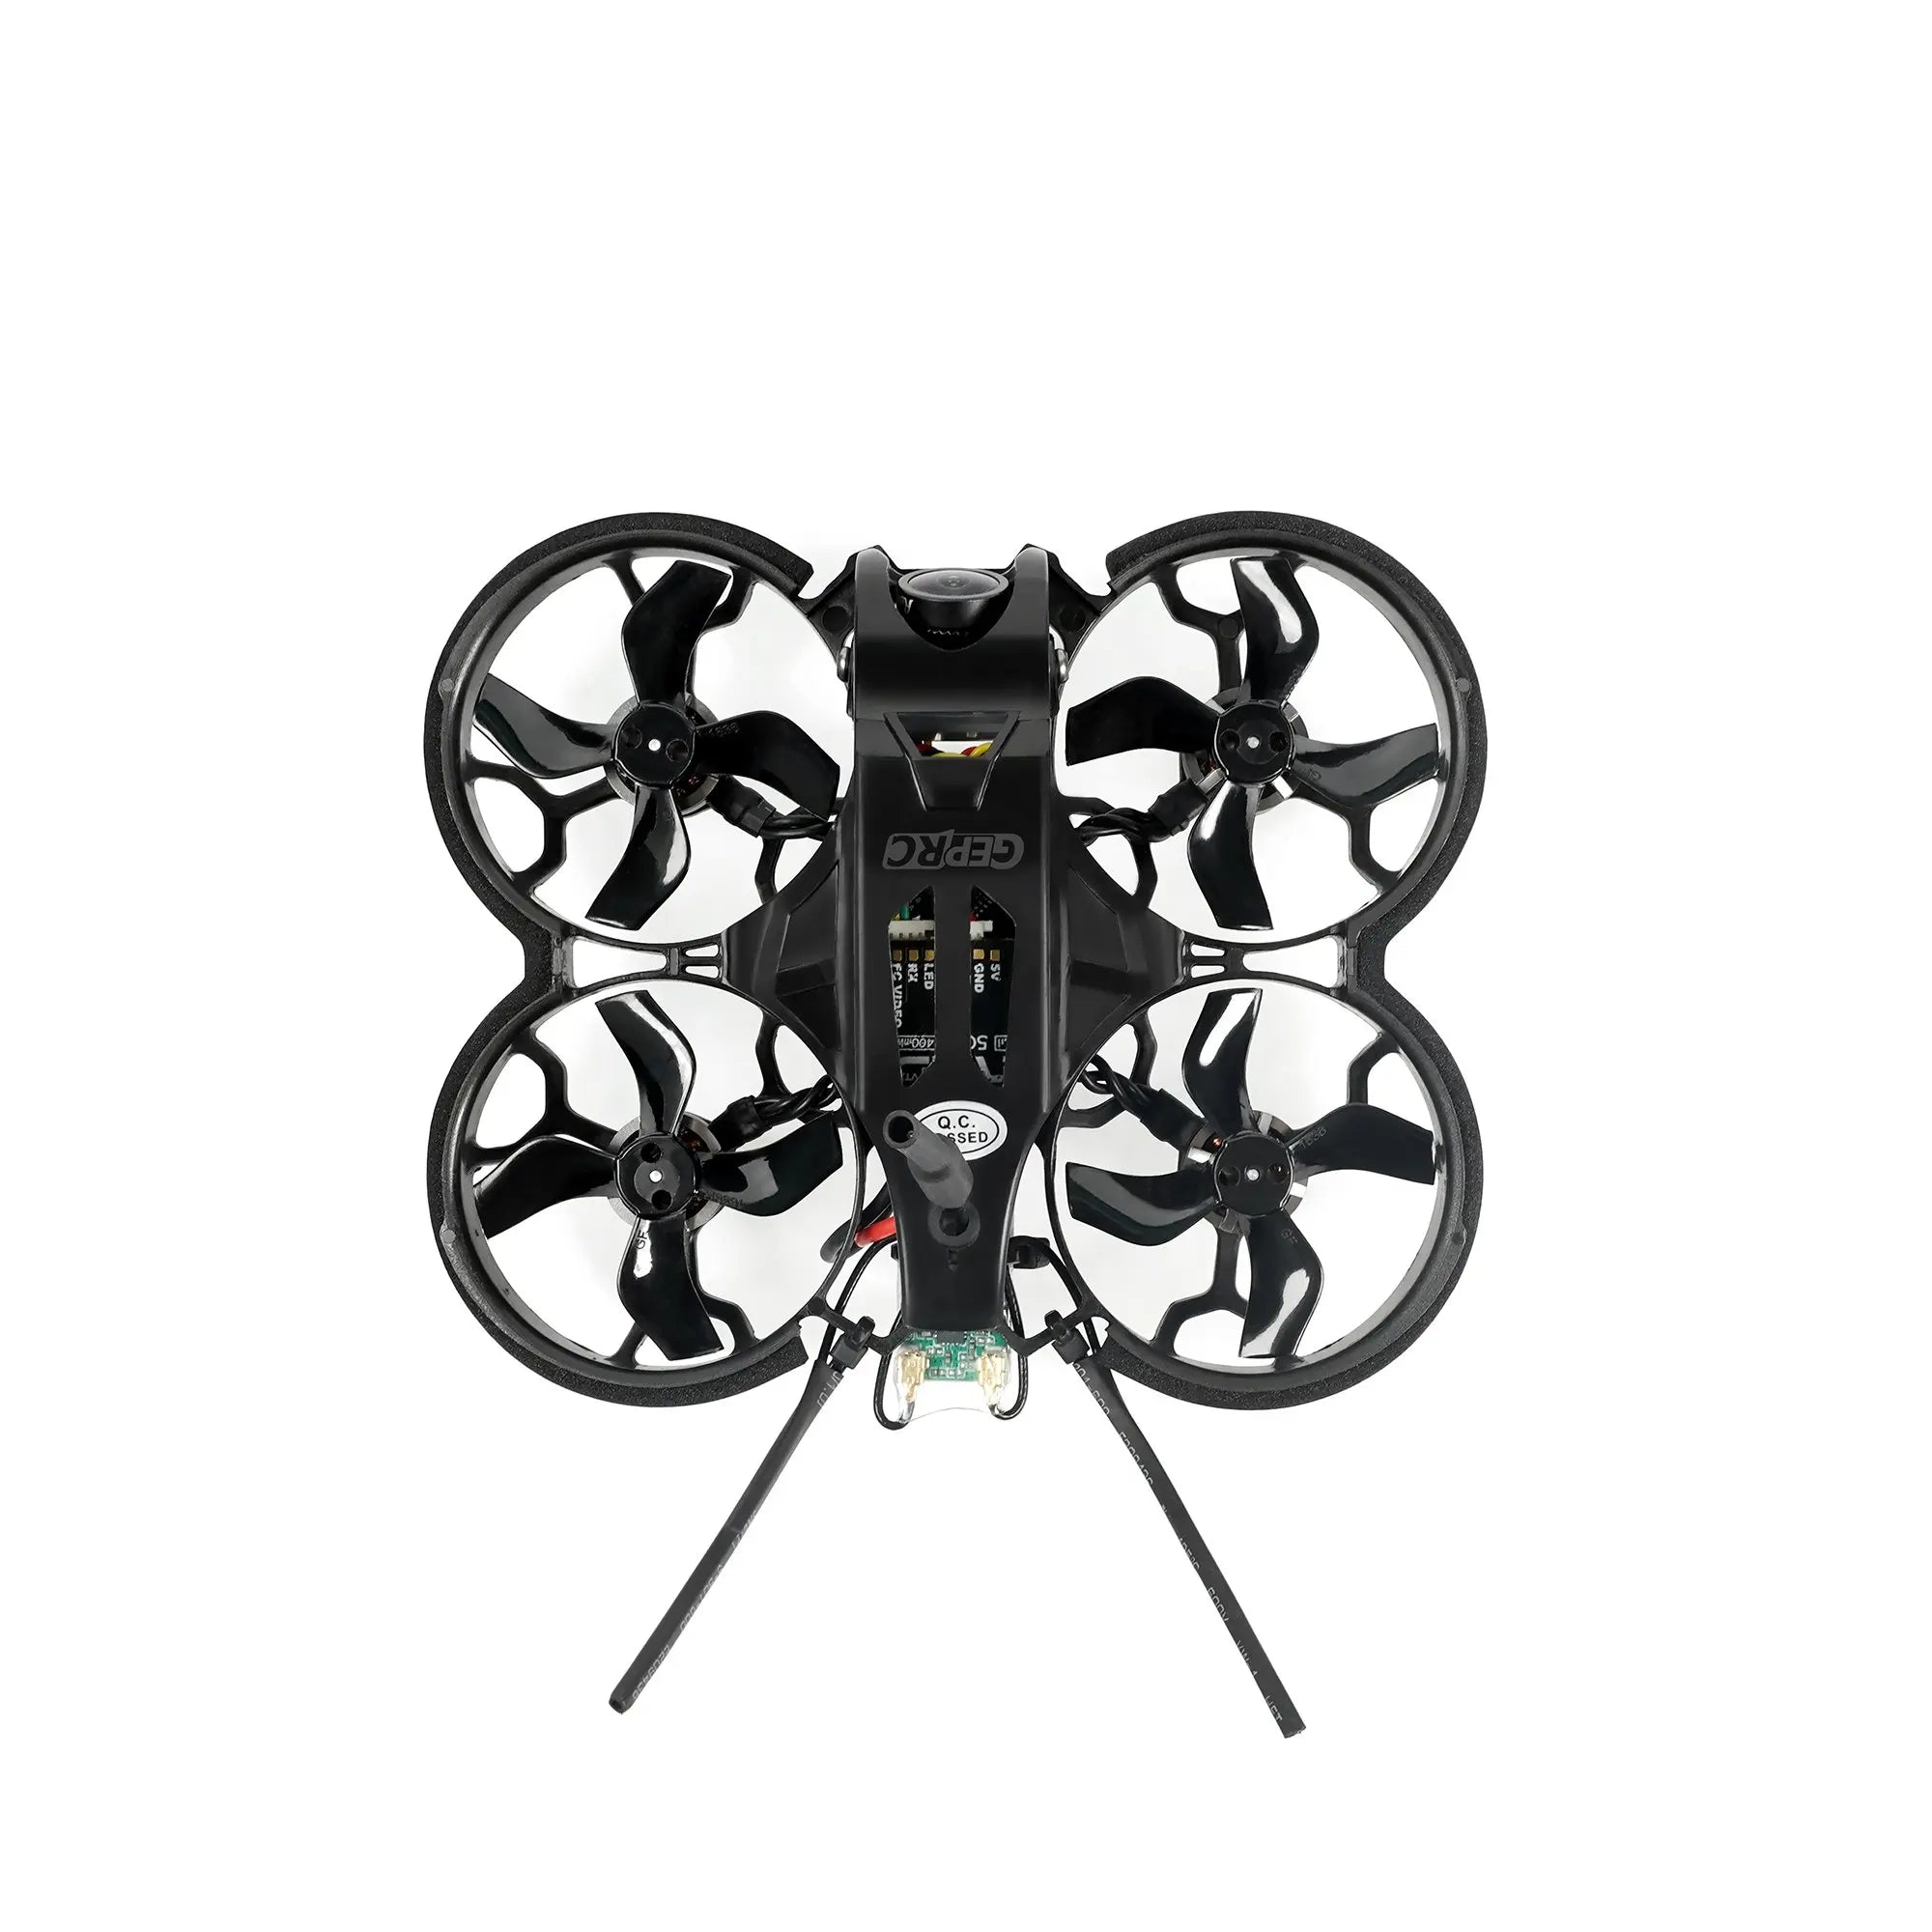 GEPRC TinyGO 4K FPV Whoop RTF is suitable for